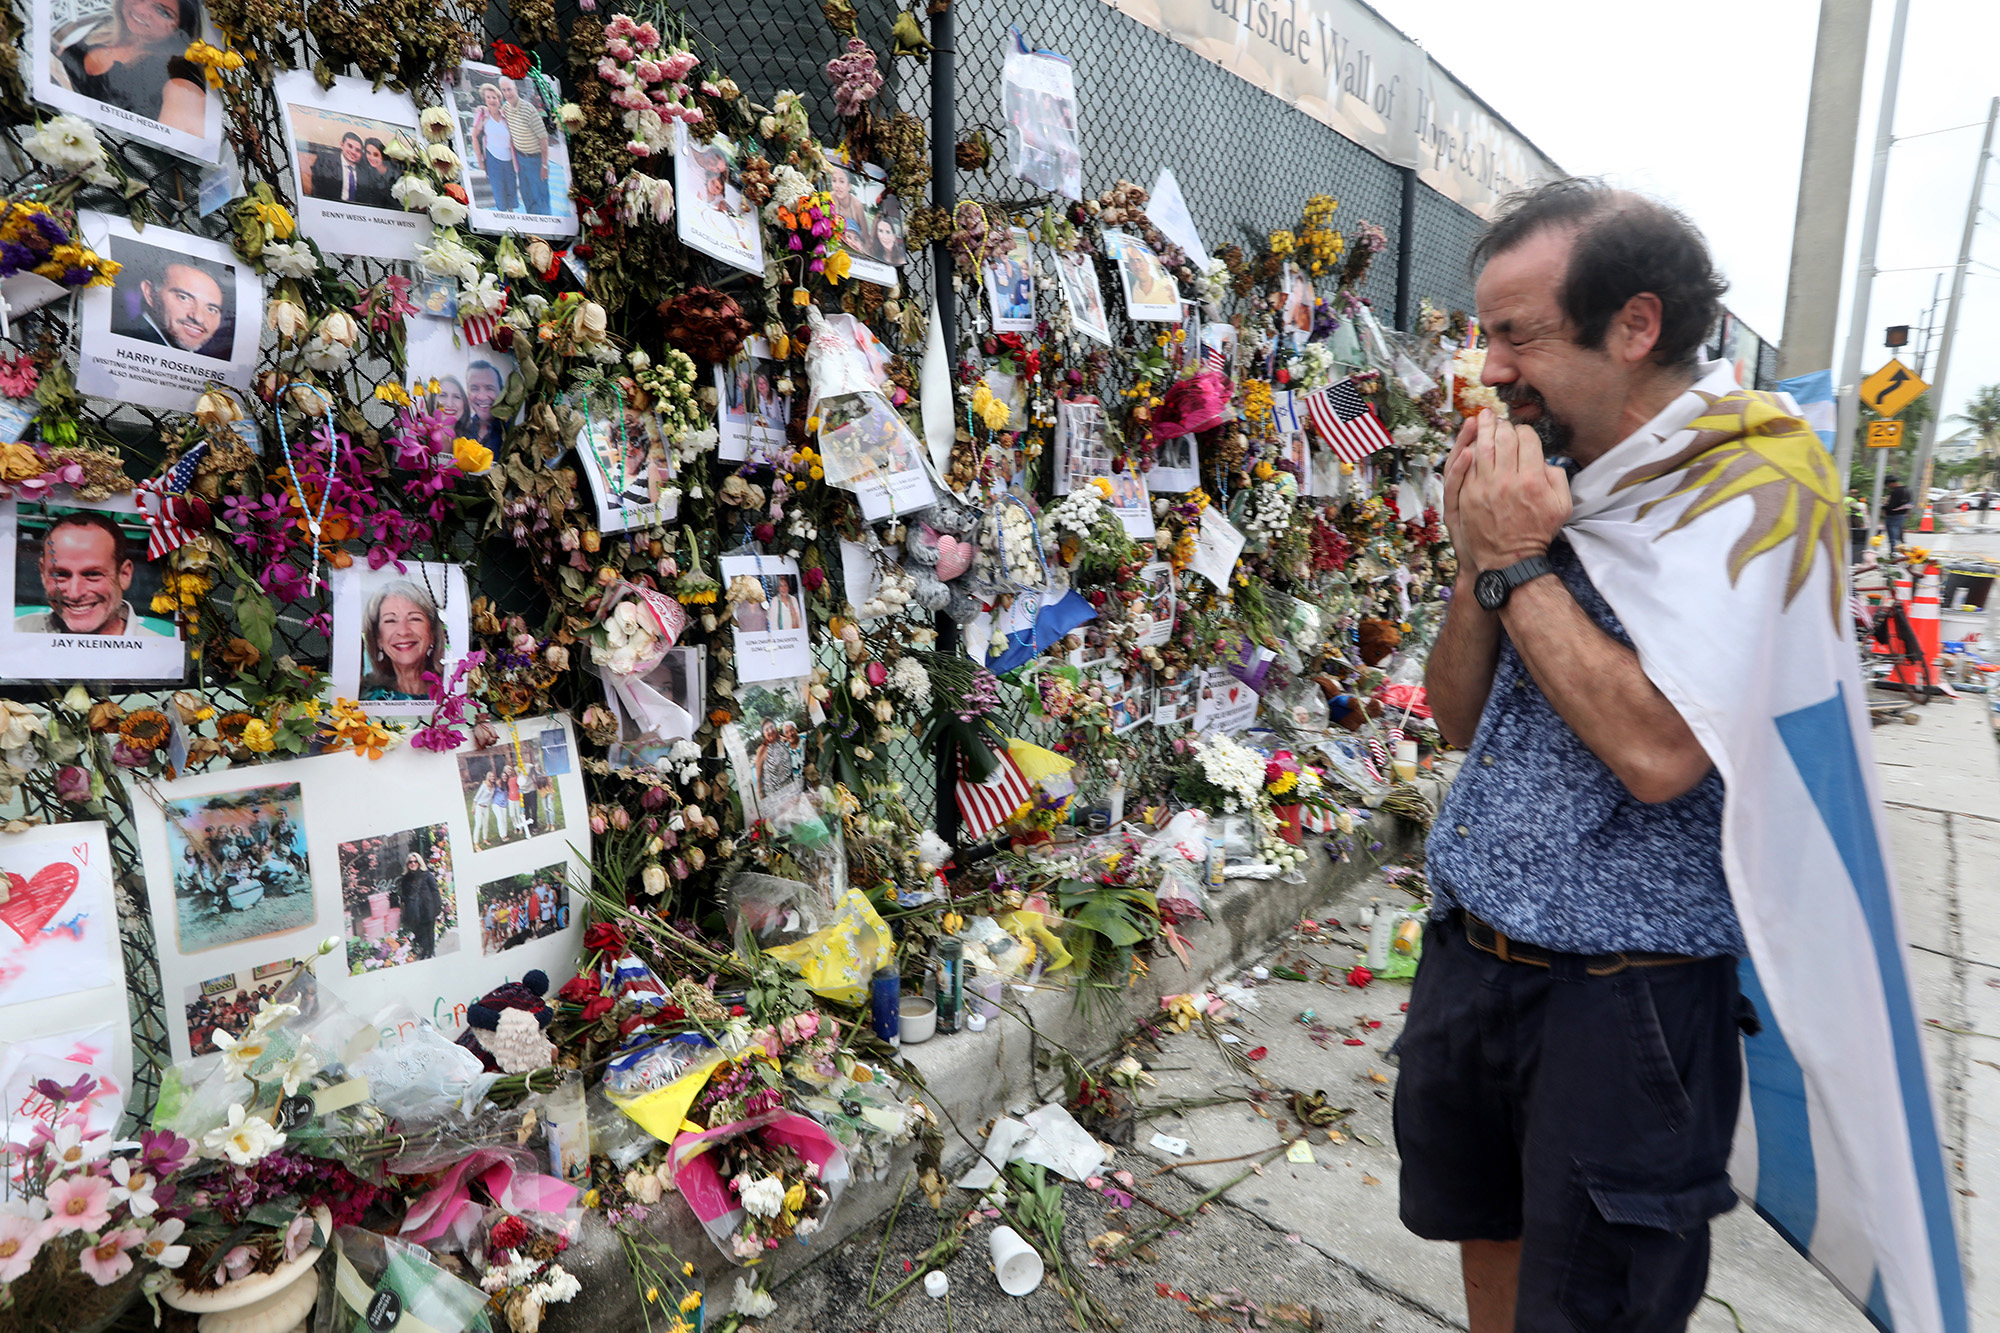 PHOTO: Bernardo Camou Fonte, 59, cries as he prays at the memorial wall in front of the site of the Champlain Towers South condo collapse in Surfside, Florida, July 6, 2021.